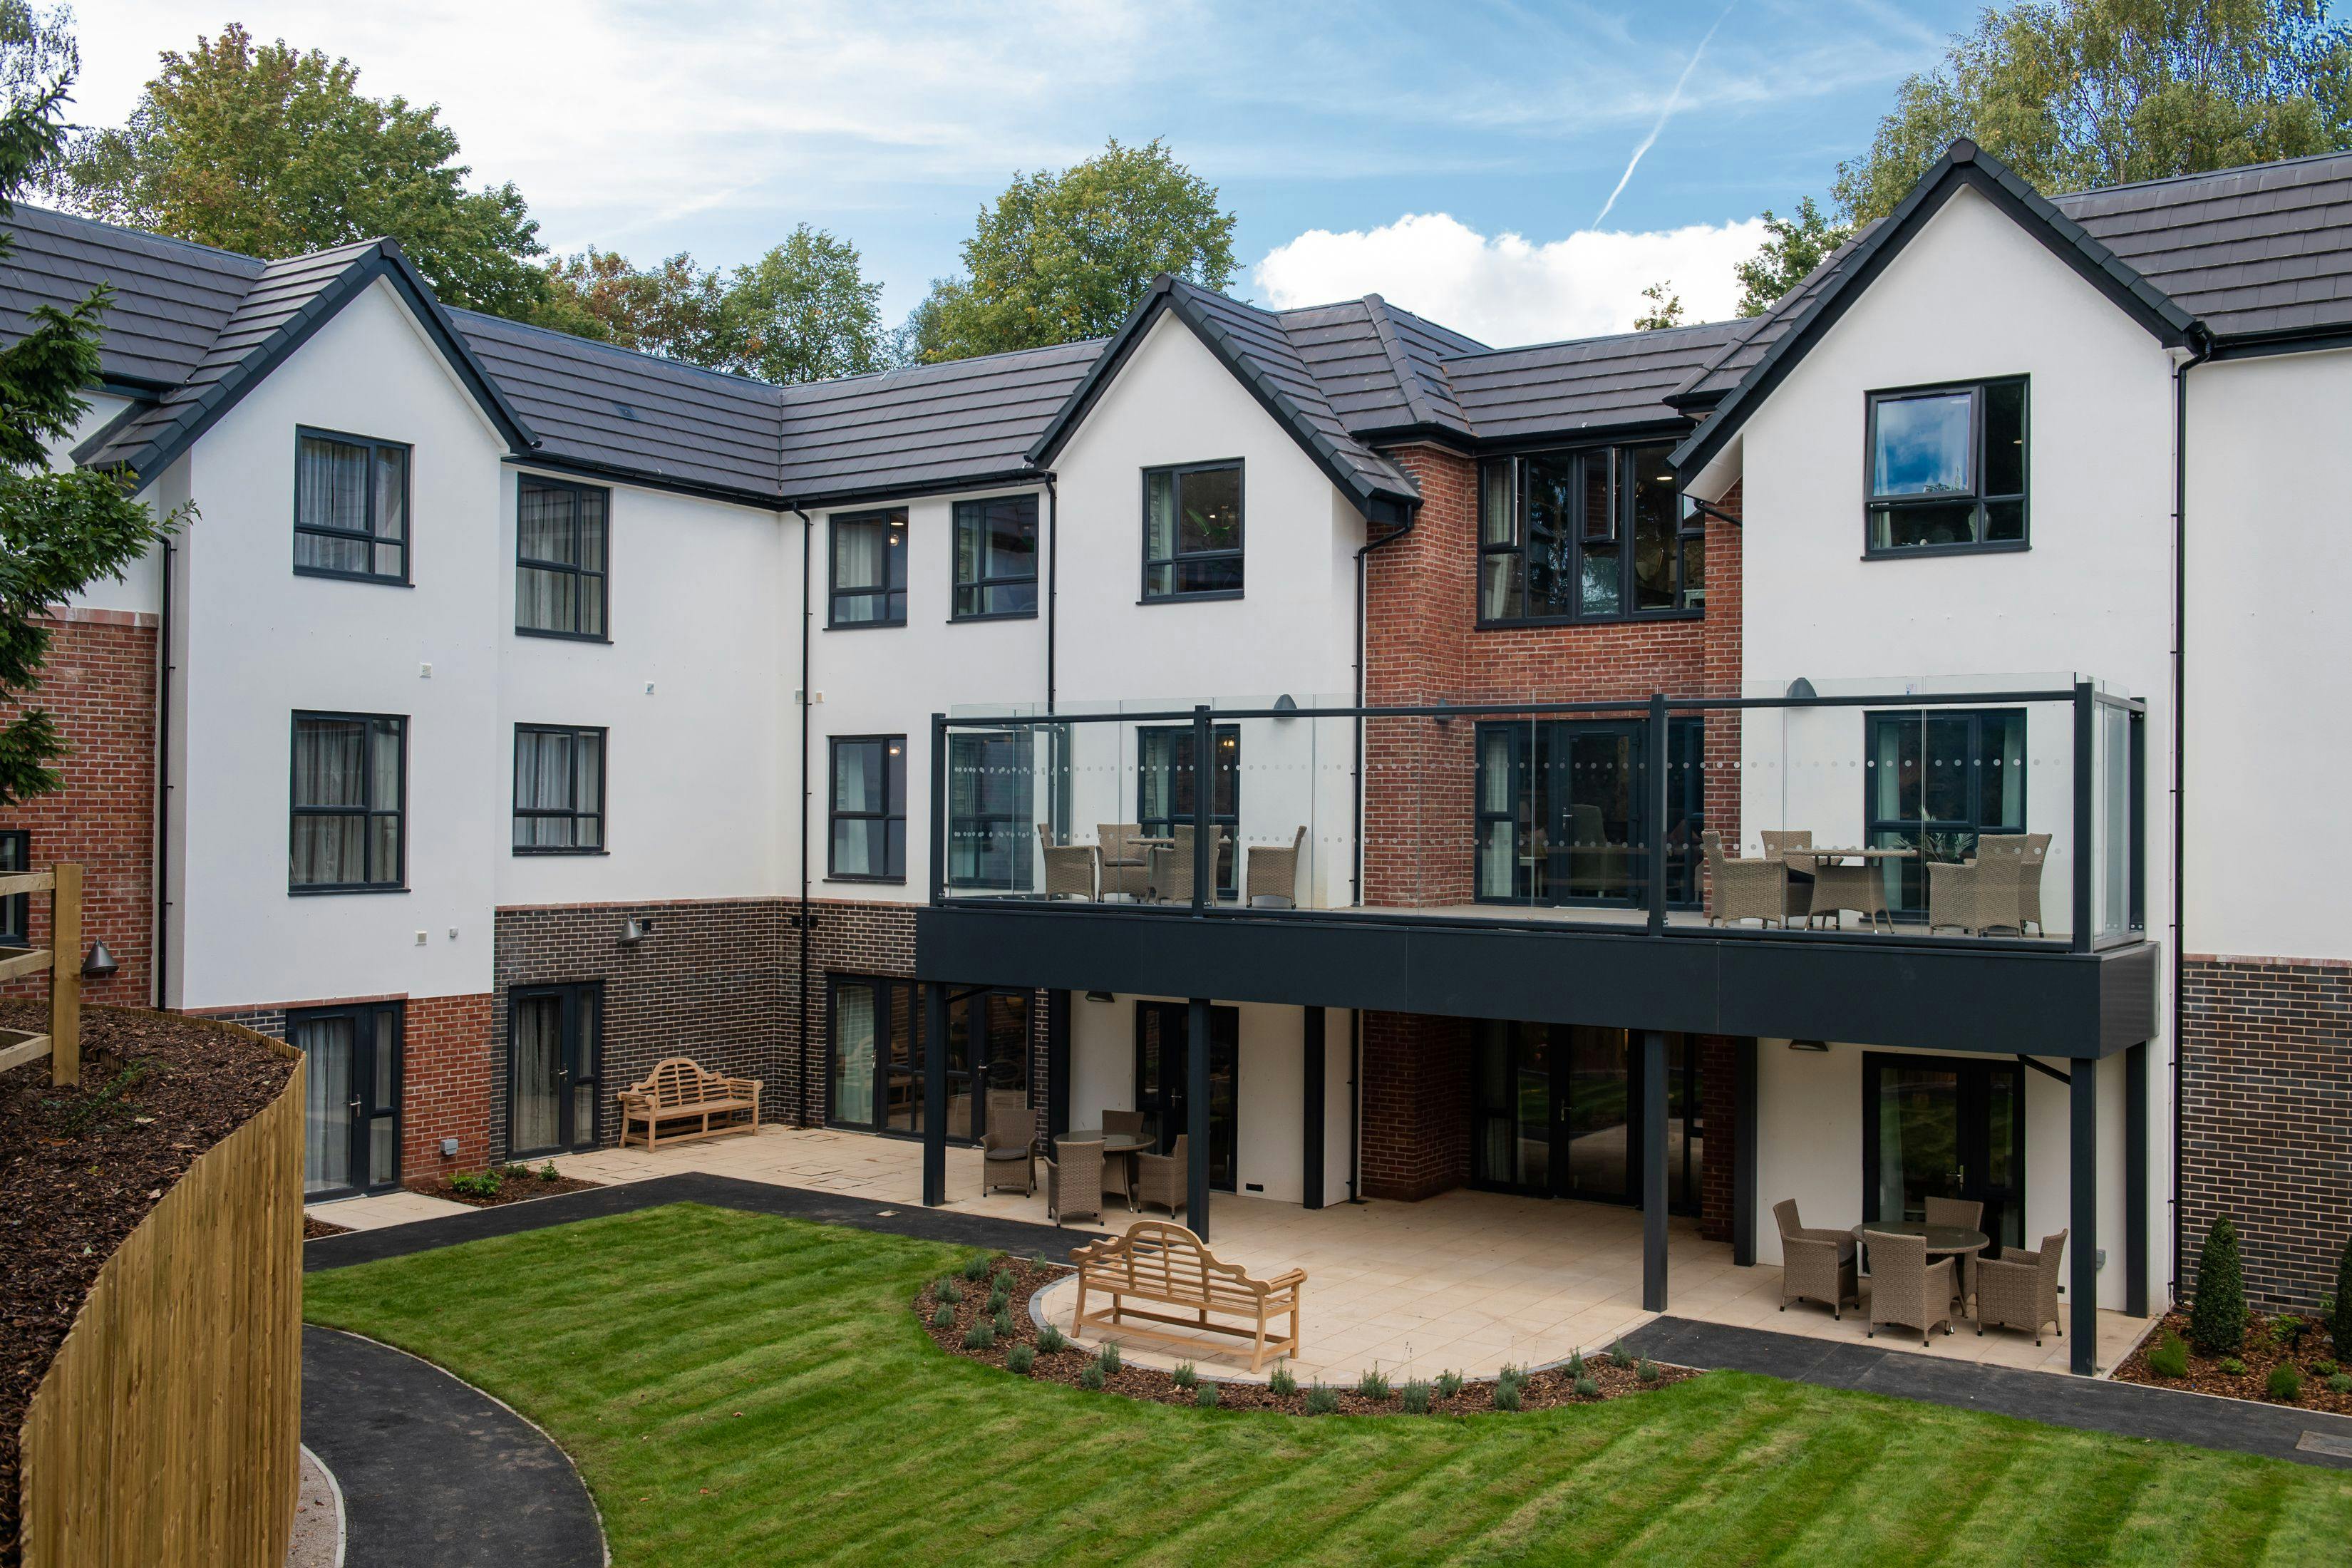 New Care - Wilmslow Manor care home 28